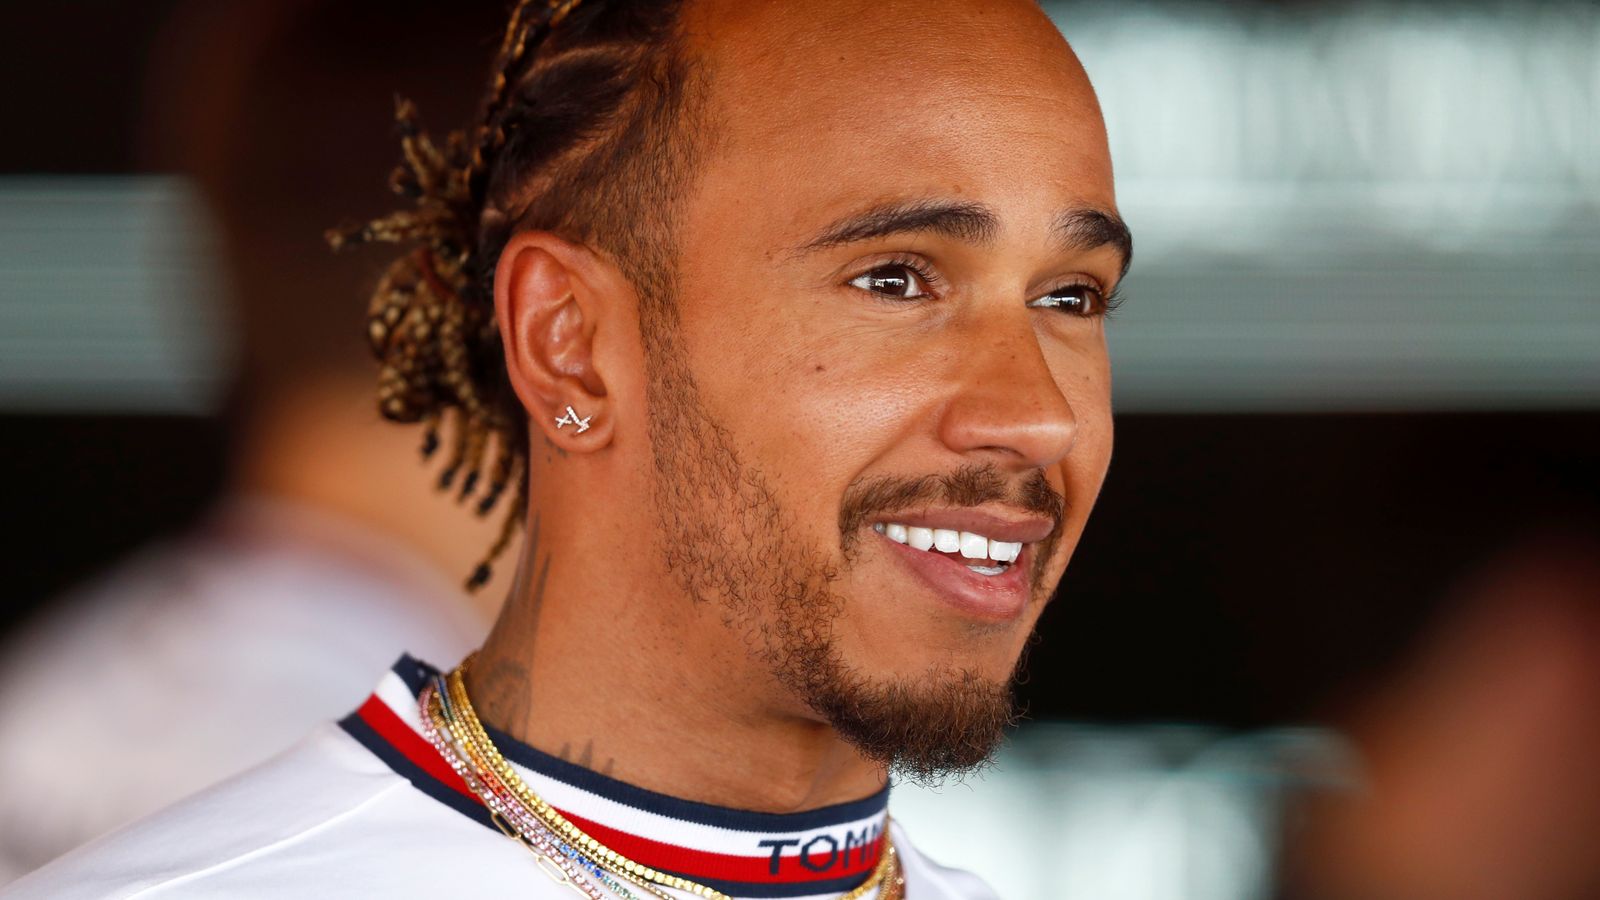 Spanish GP: Lewis Hamilton 'super happy' with Mercedes progress after crucial upgrades